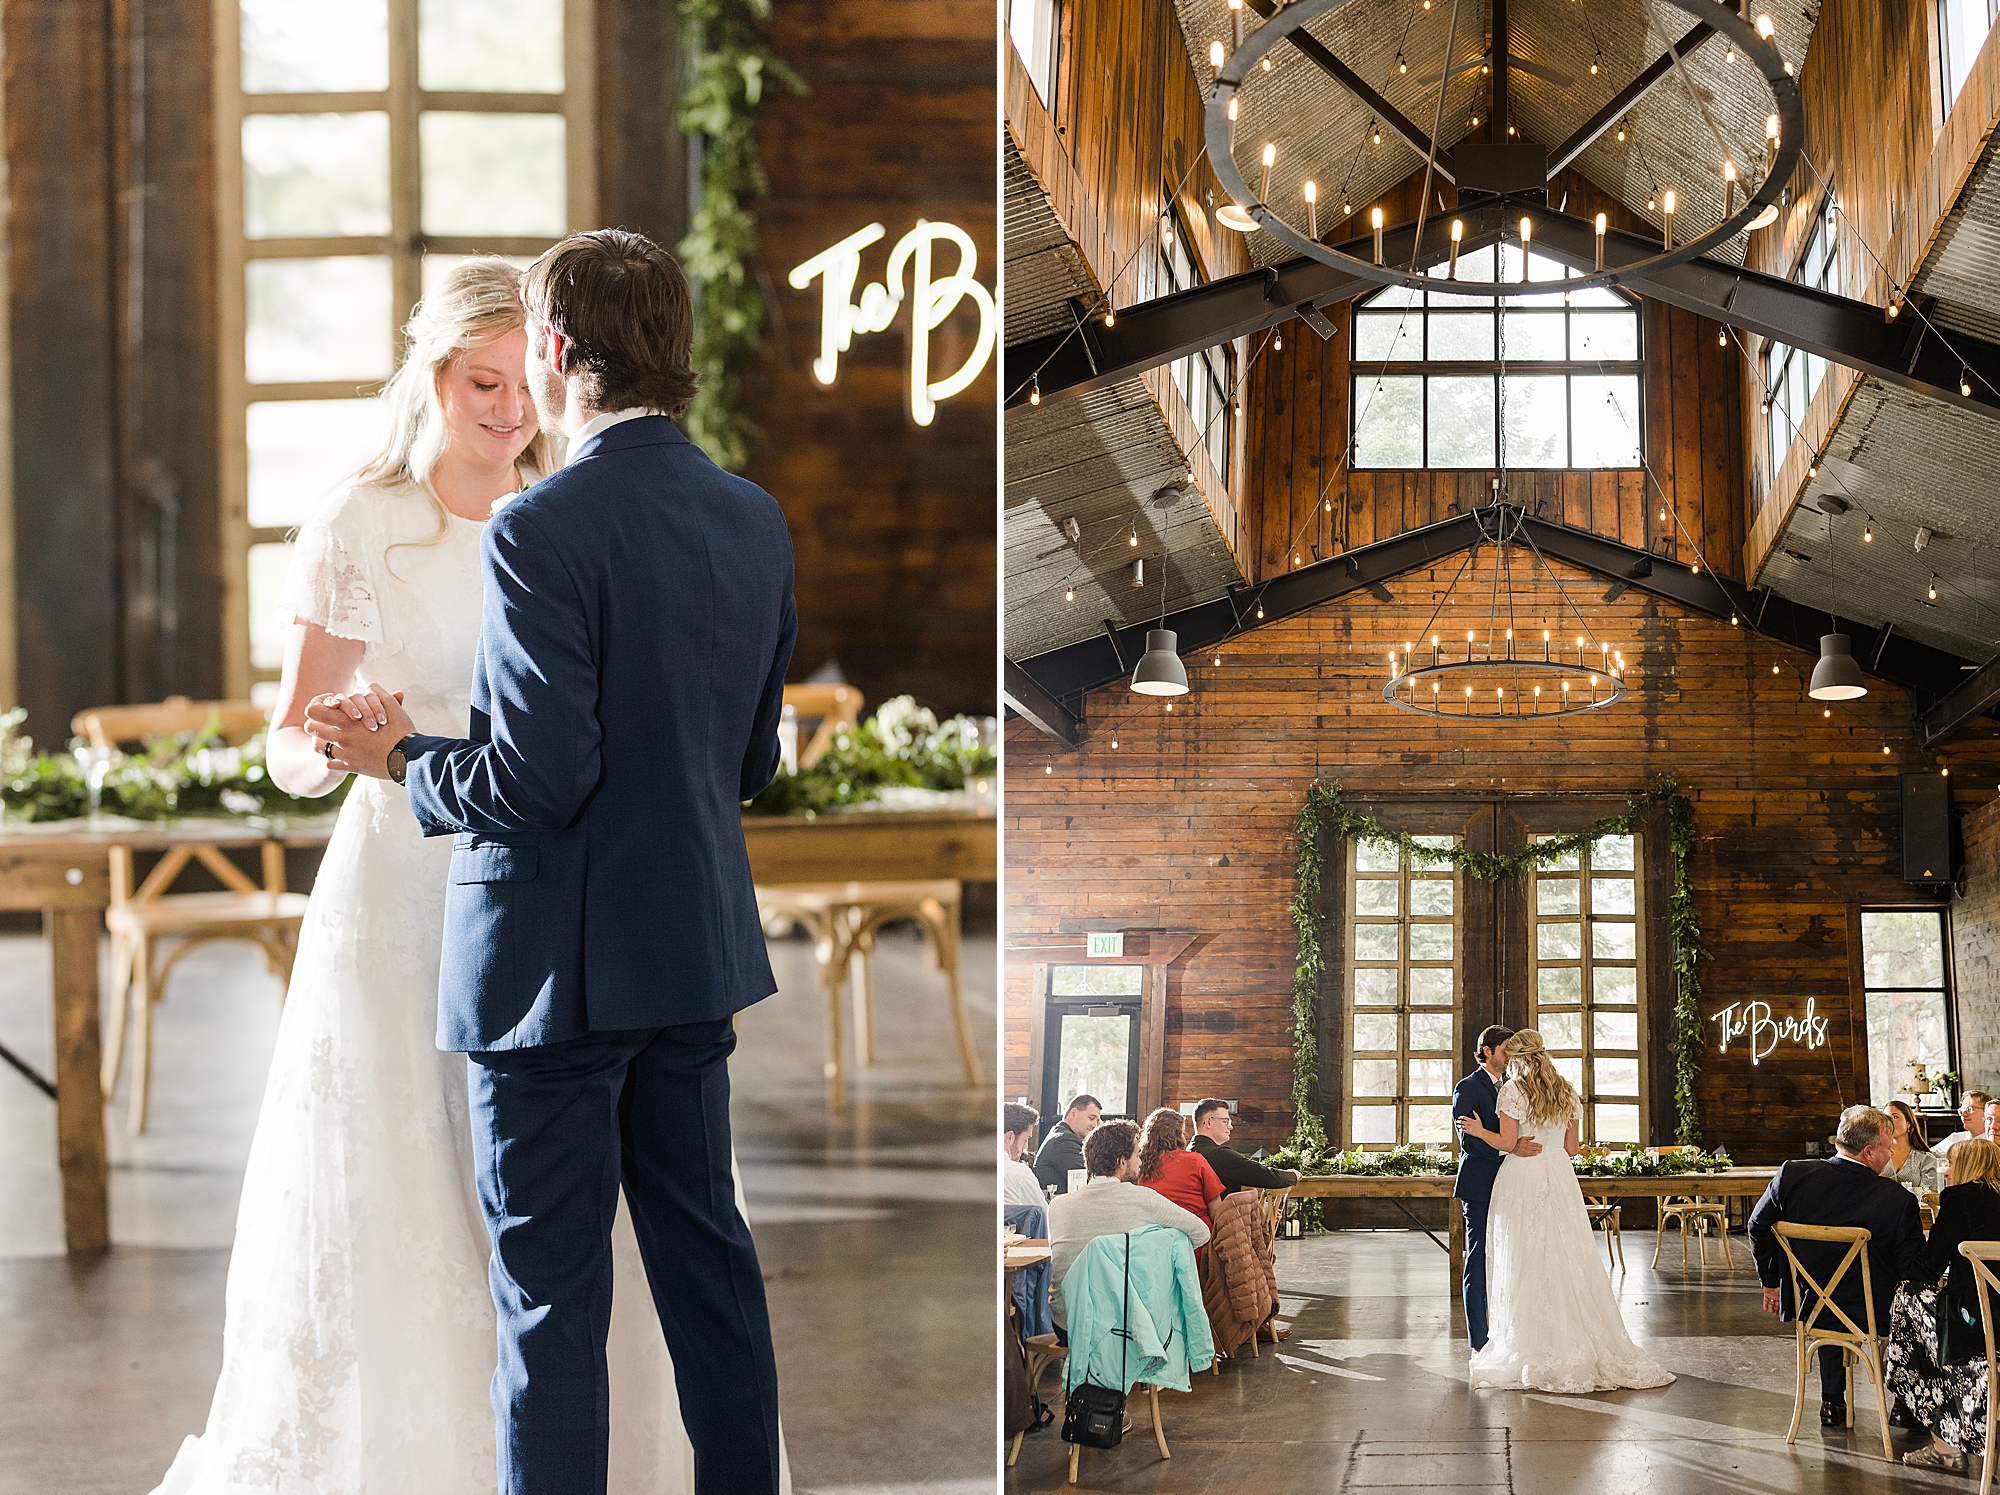 Bride and groom's first dance in front of a twinkling backdrop
